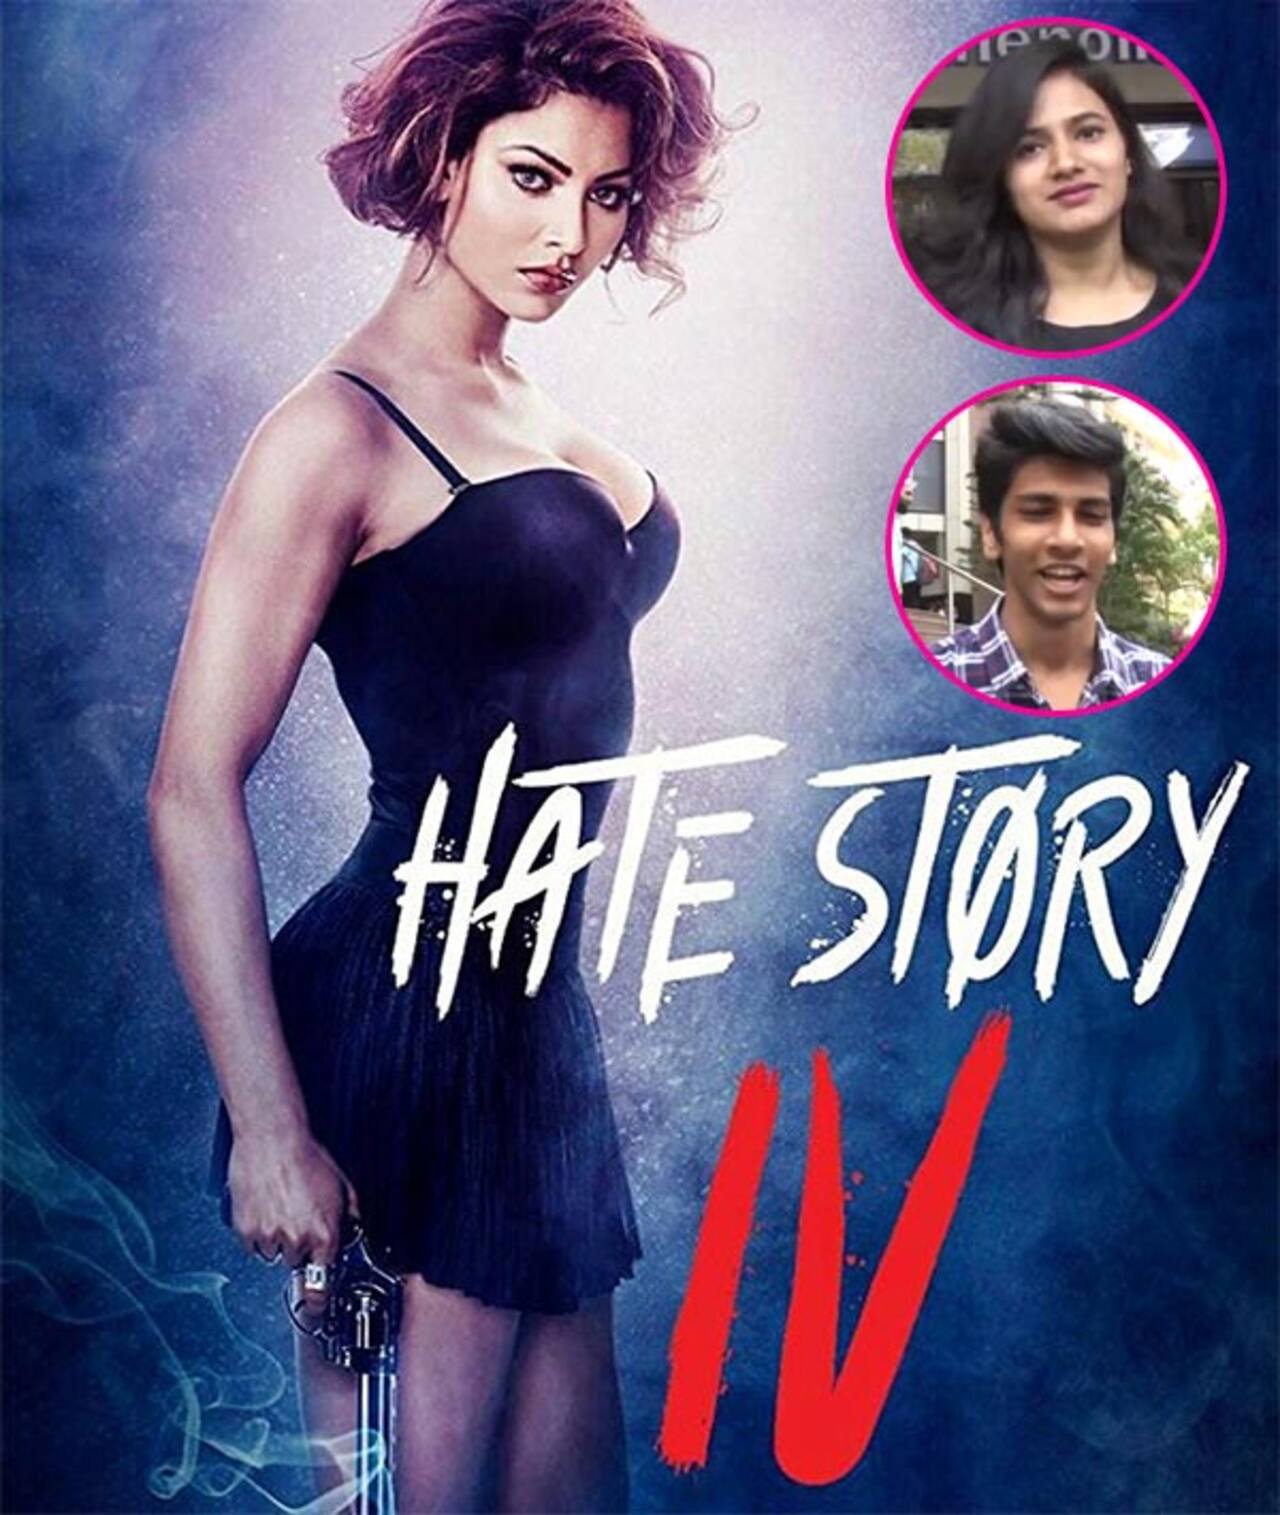 Hate Story Iv Public Review Audience Prefers The Prequels Over This Urvashi Rautela Karan Wahi 